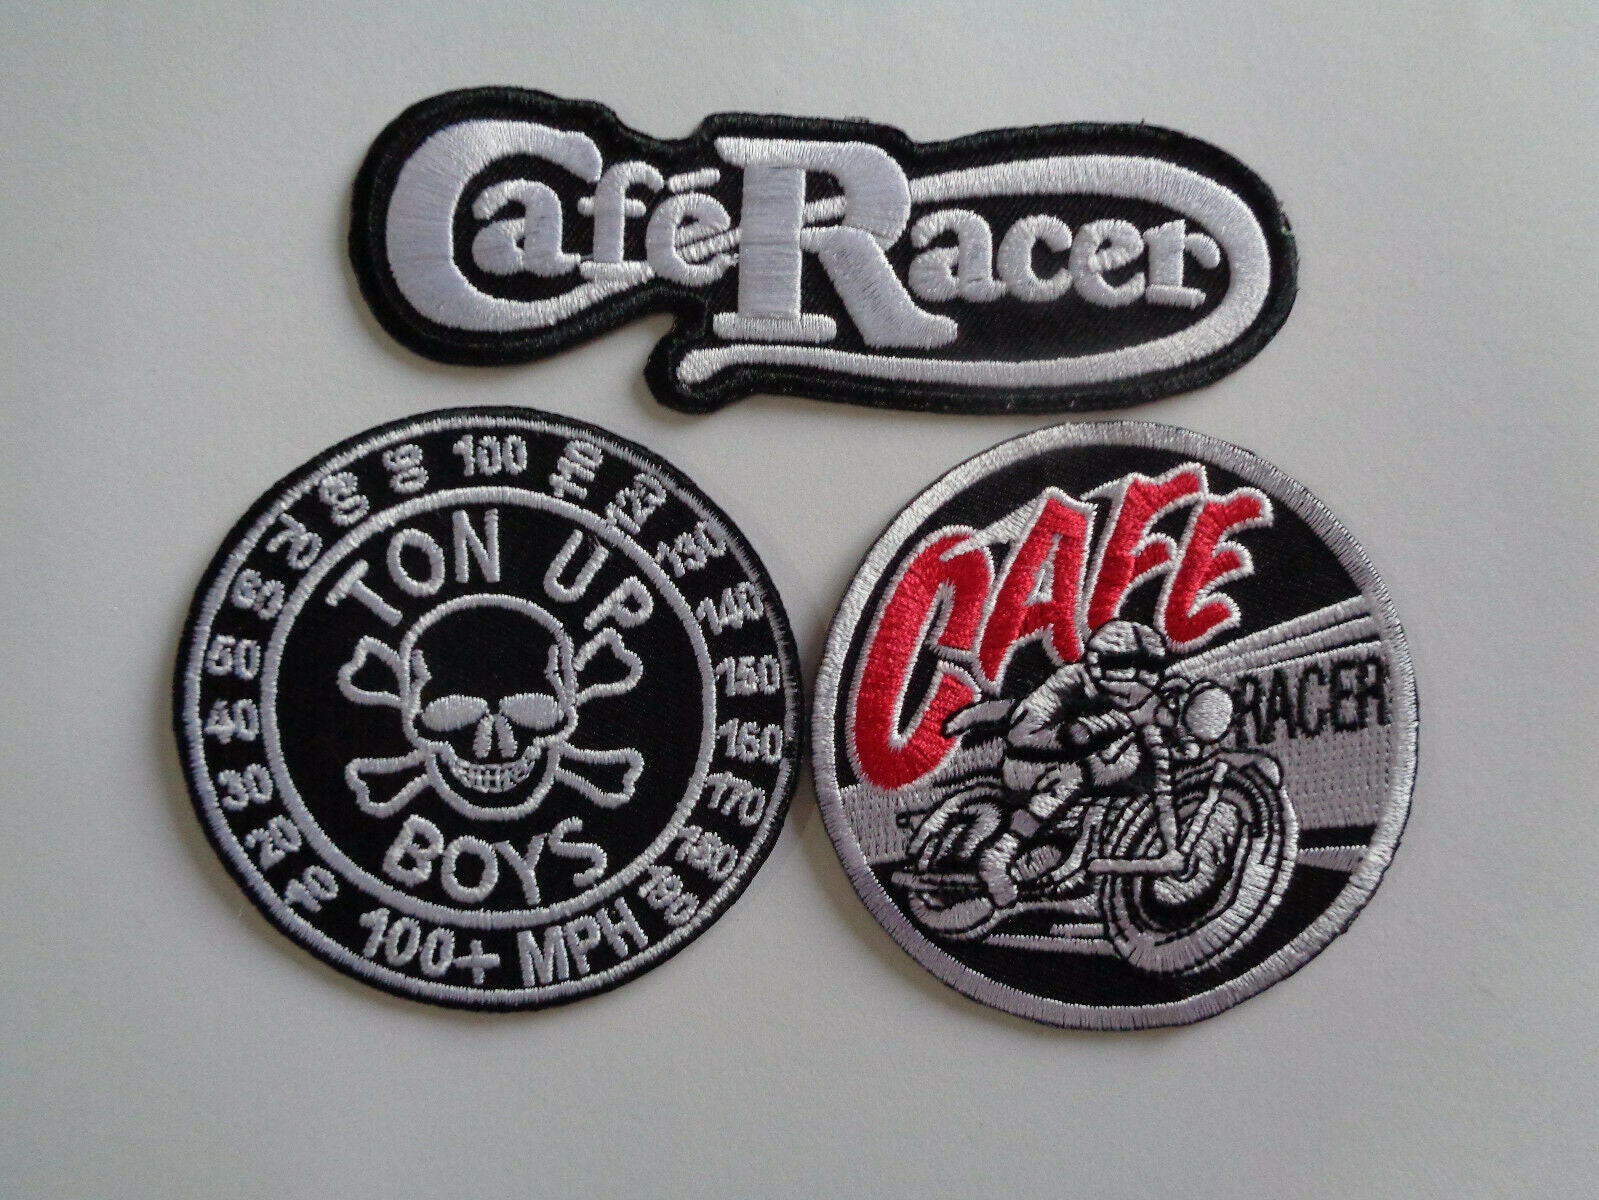 CAFE RACER MOTORCYCLE LOGO Sport Motor Racing Car Embroidered Iron On Patch sew 